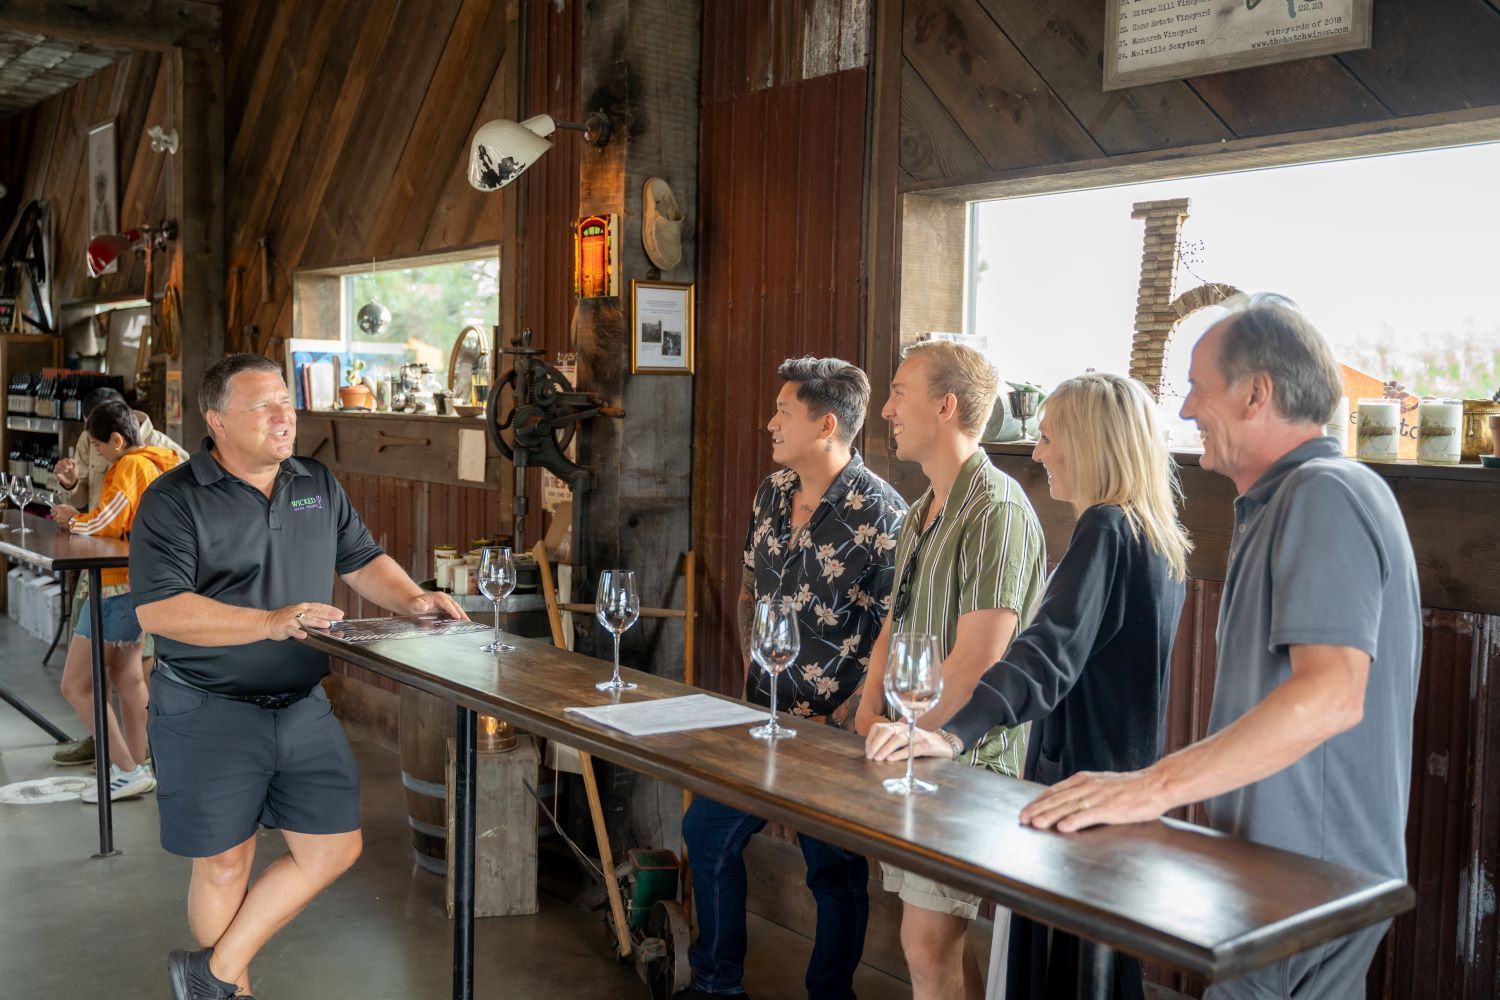 A Wicked Wine Tours and customers at the Hatch Winery in West Kelowna.